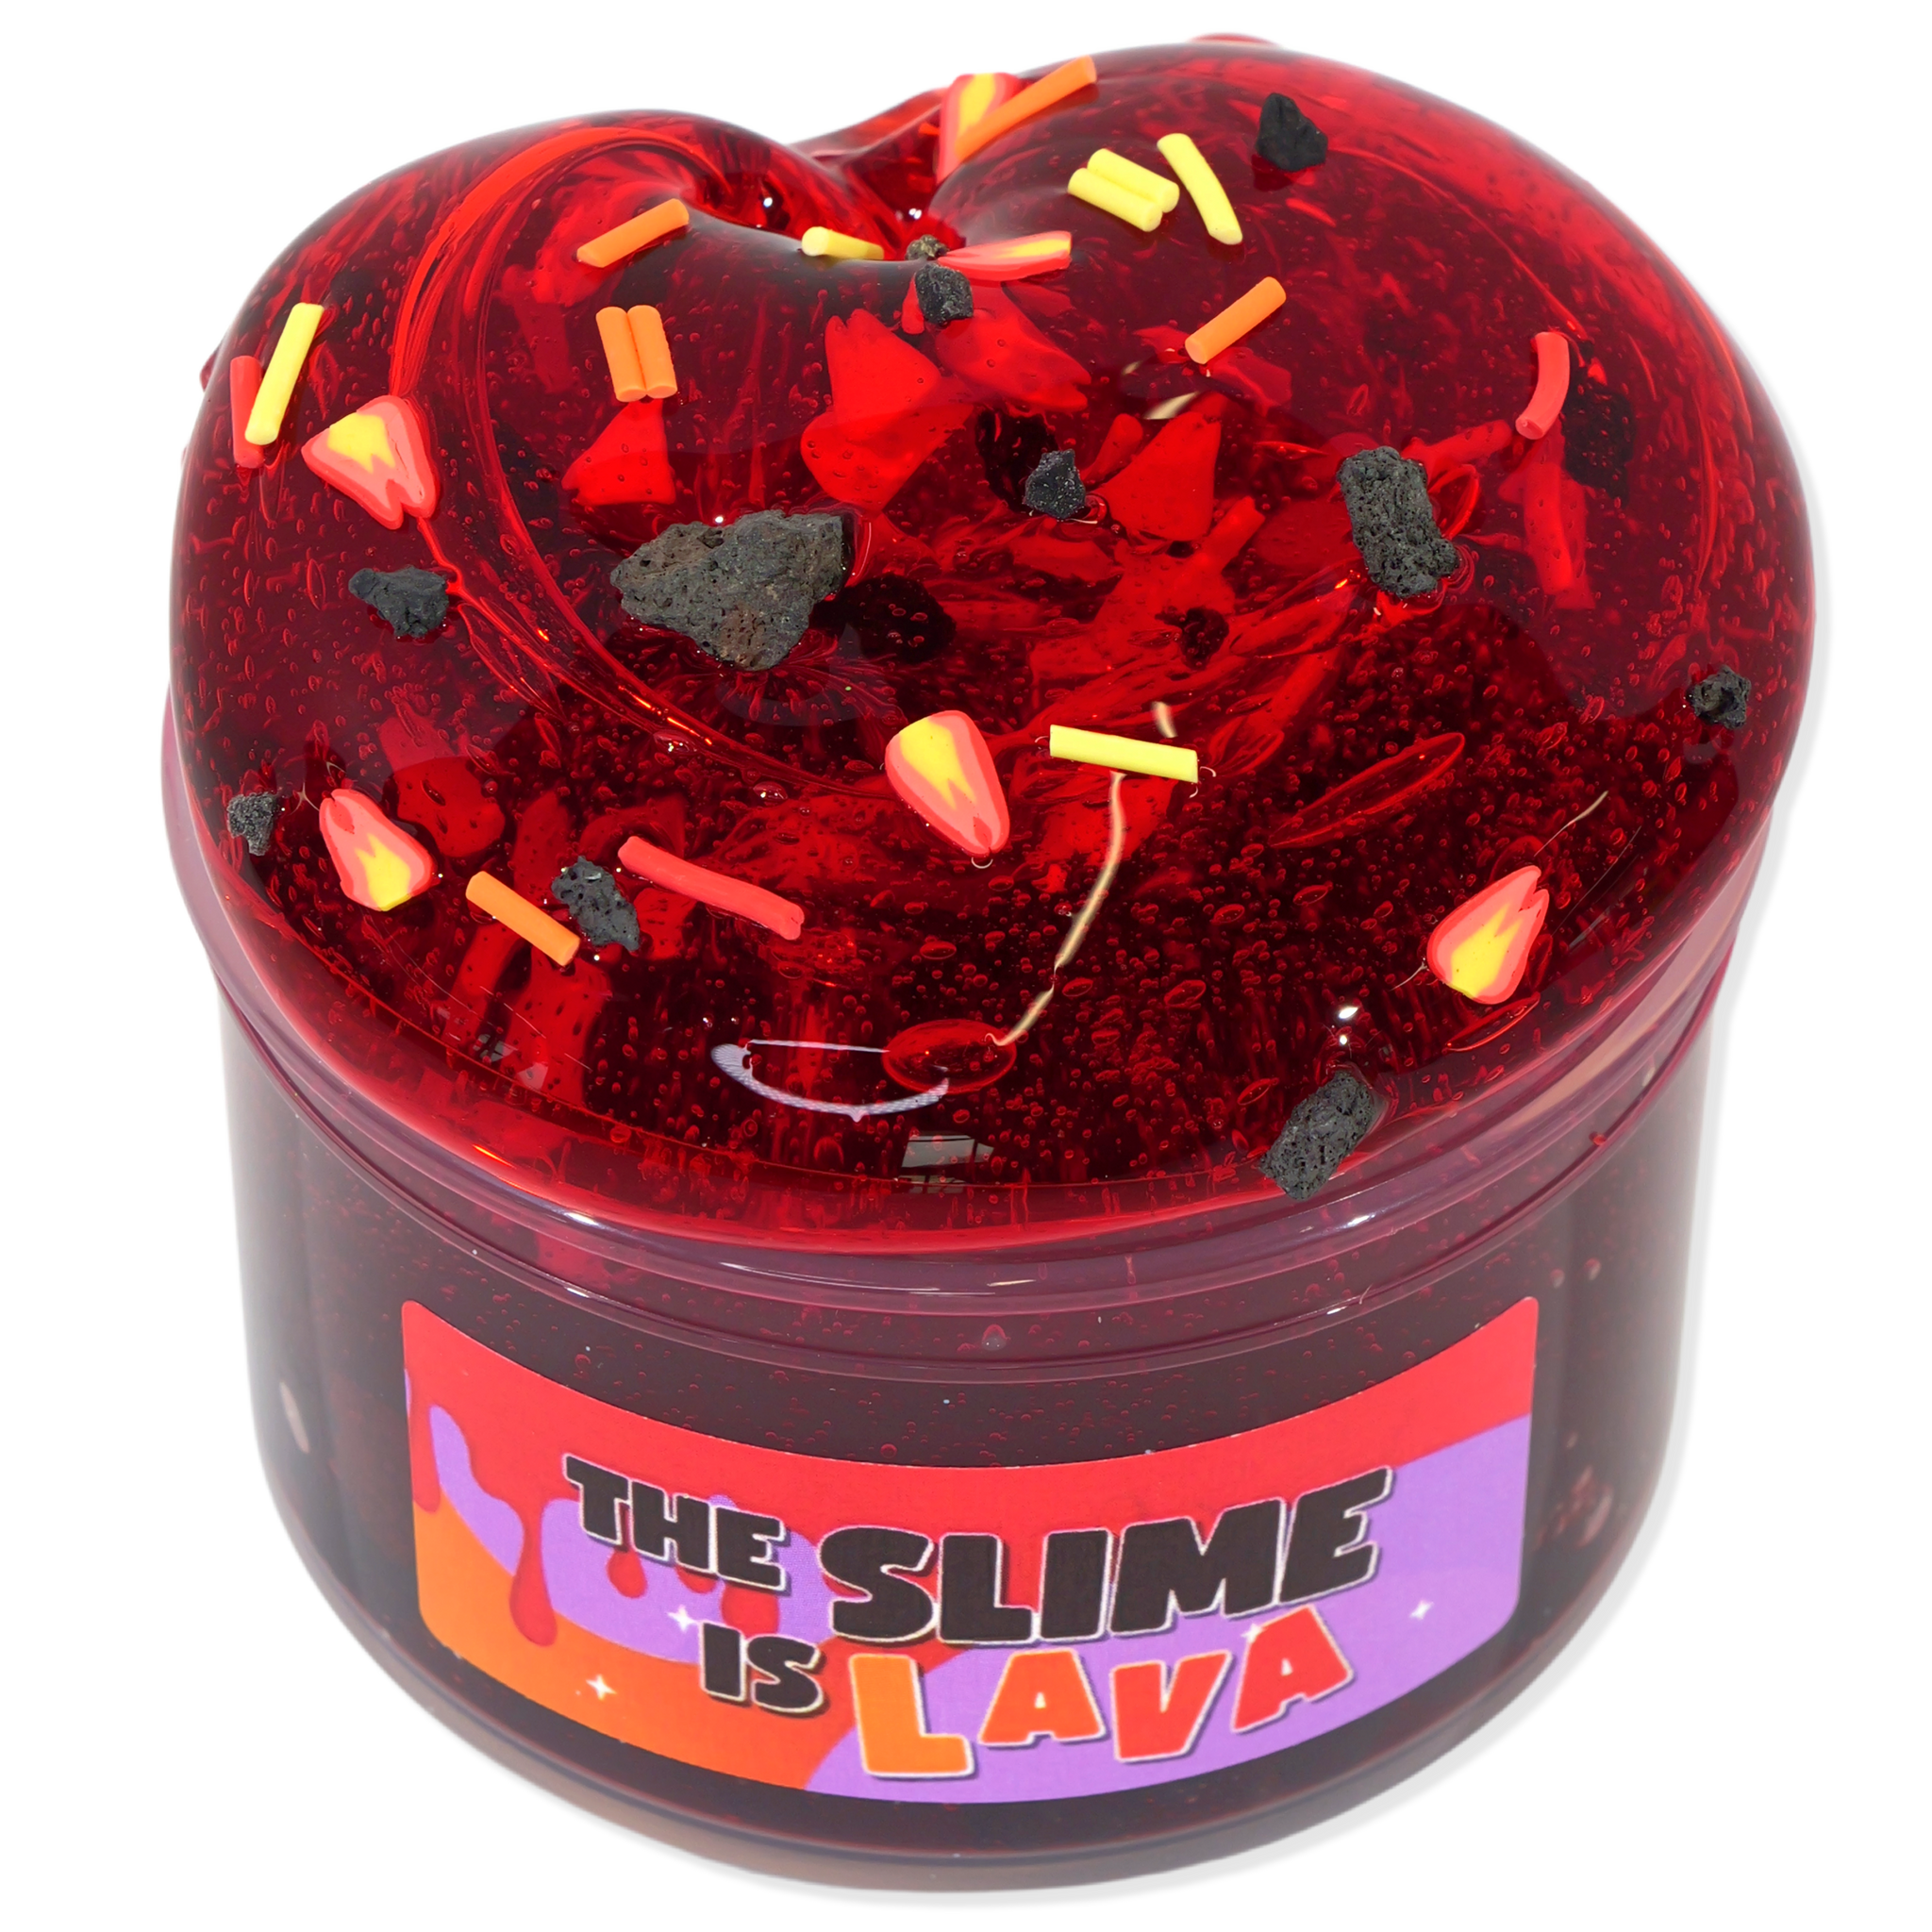 The Slime Is Lava – PeachyBbies